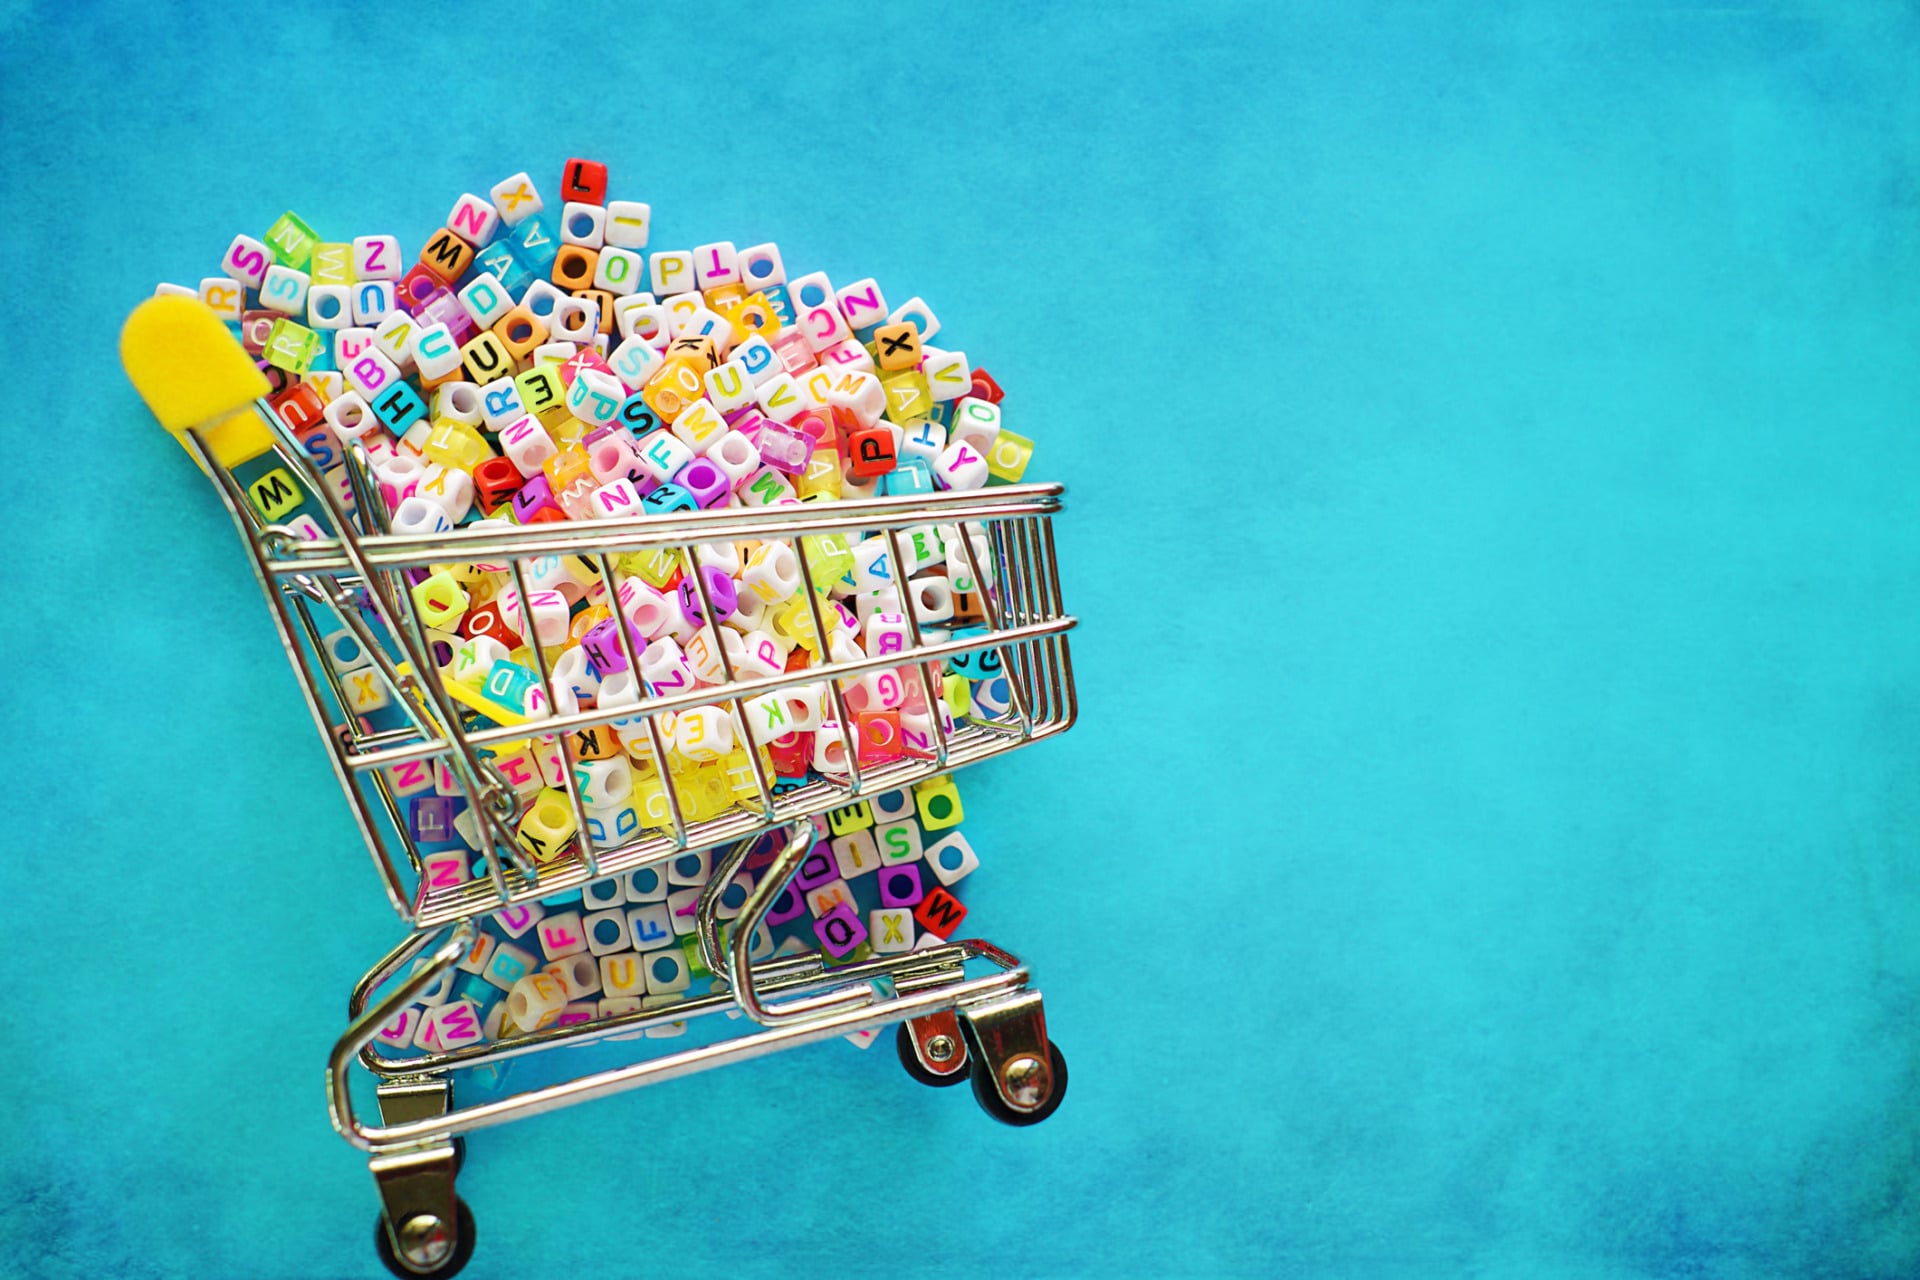 Mini shopping cart or trolley full of English letter beads on blue background for learning concept, added vintage filter effect